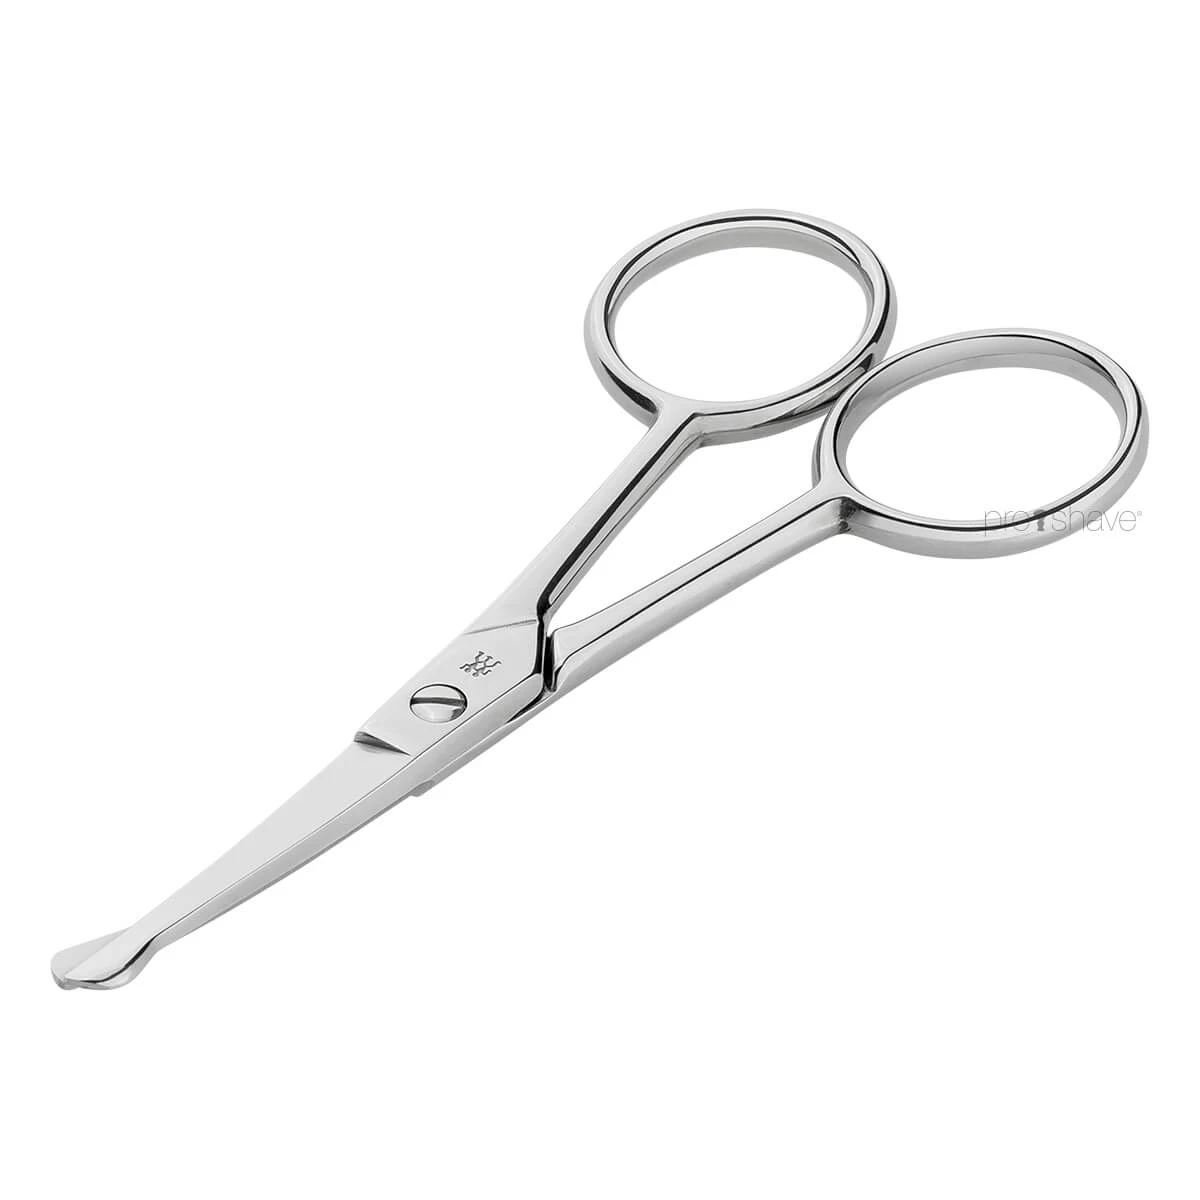 Zwilling J.A. Henckels Nose and Ear Hair Scissors